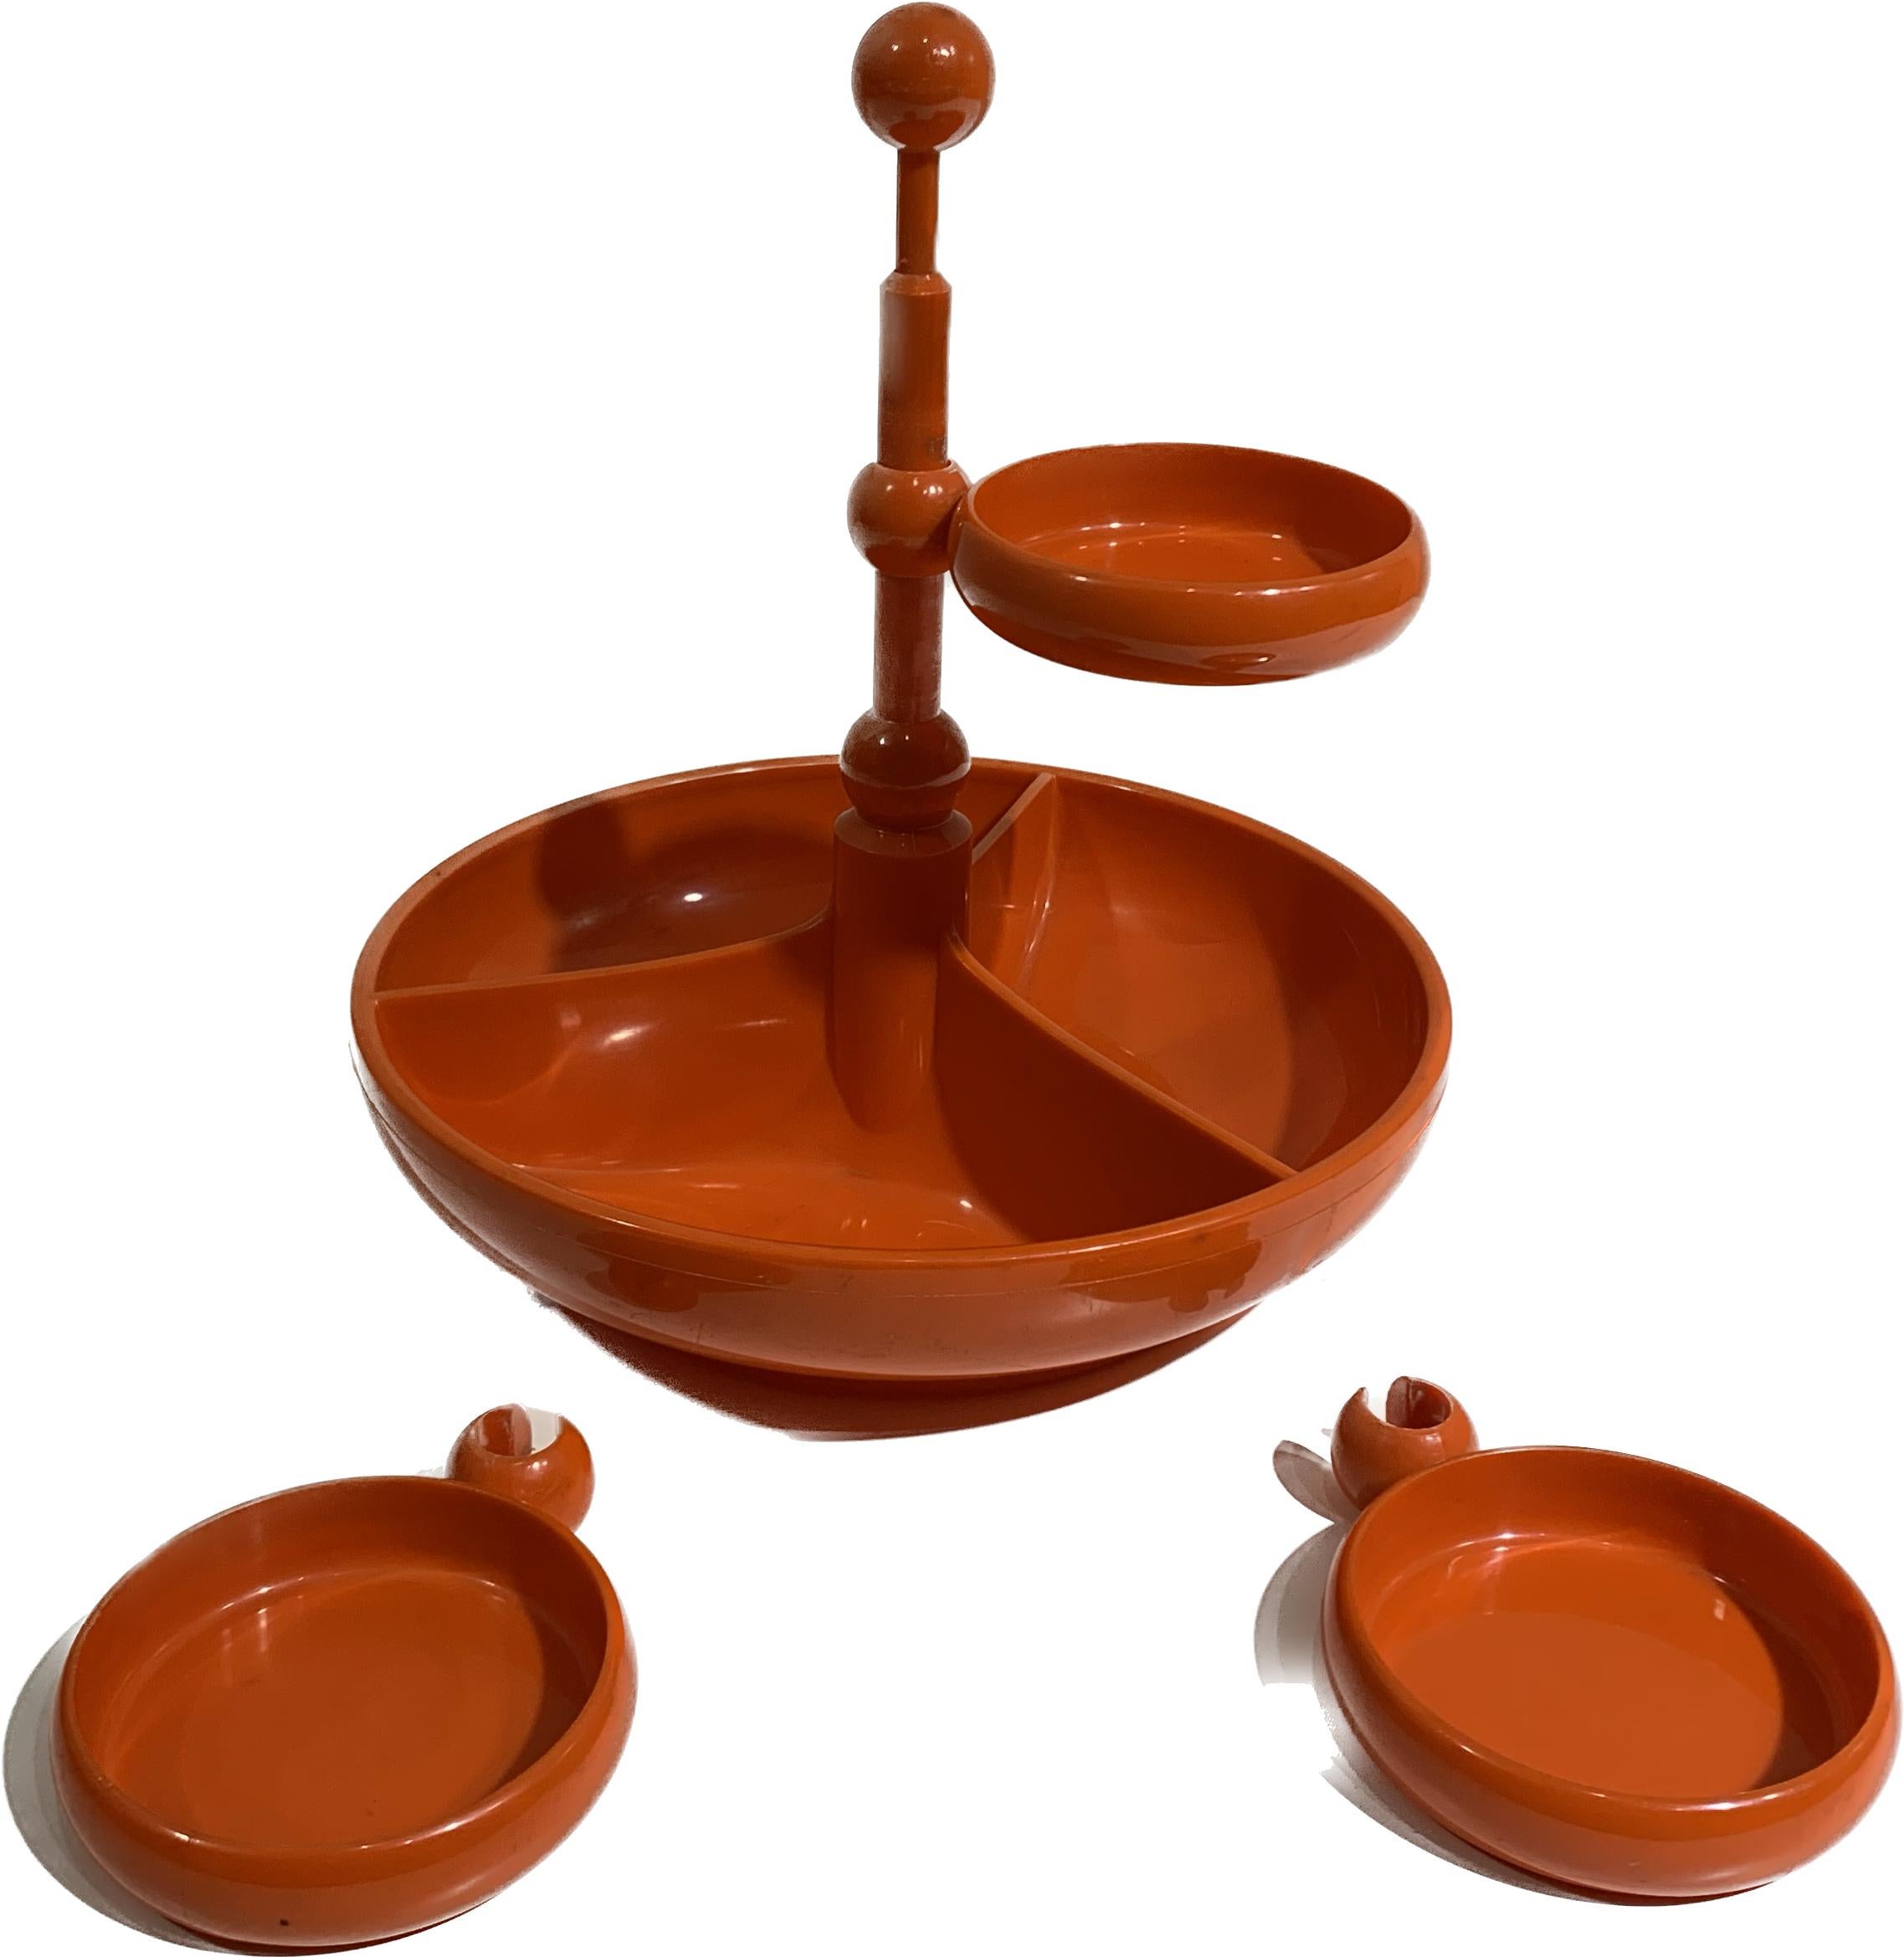 Very nice vintage orange snack tower with rotating platters made from ABS plastic.
The main central bowl holds three divided compartments that are fixed and there are three rotating smaller plates above where you can store all sorts of gooodies.